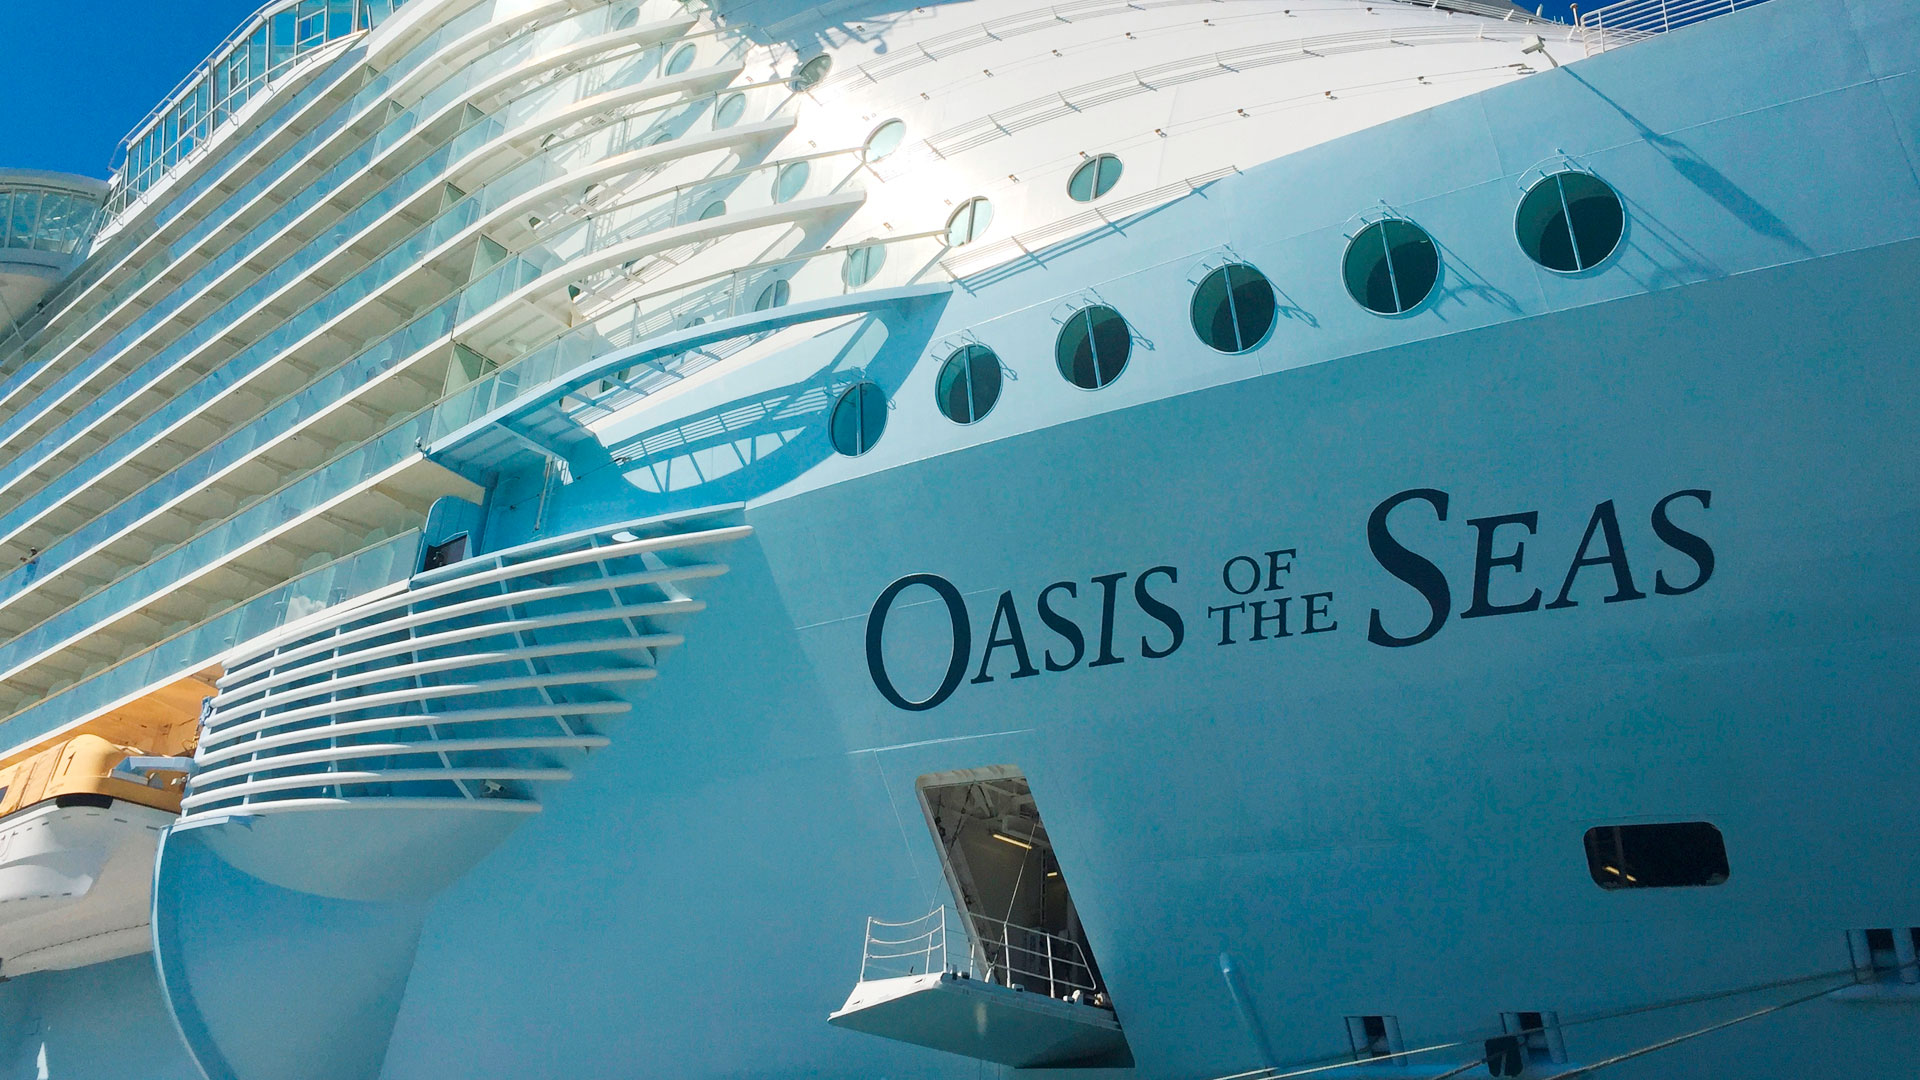 Oasis of the Sea ship applied AVK products in the ships